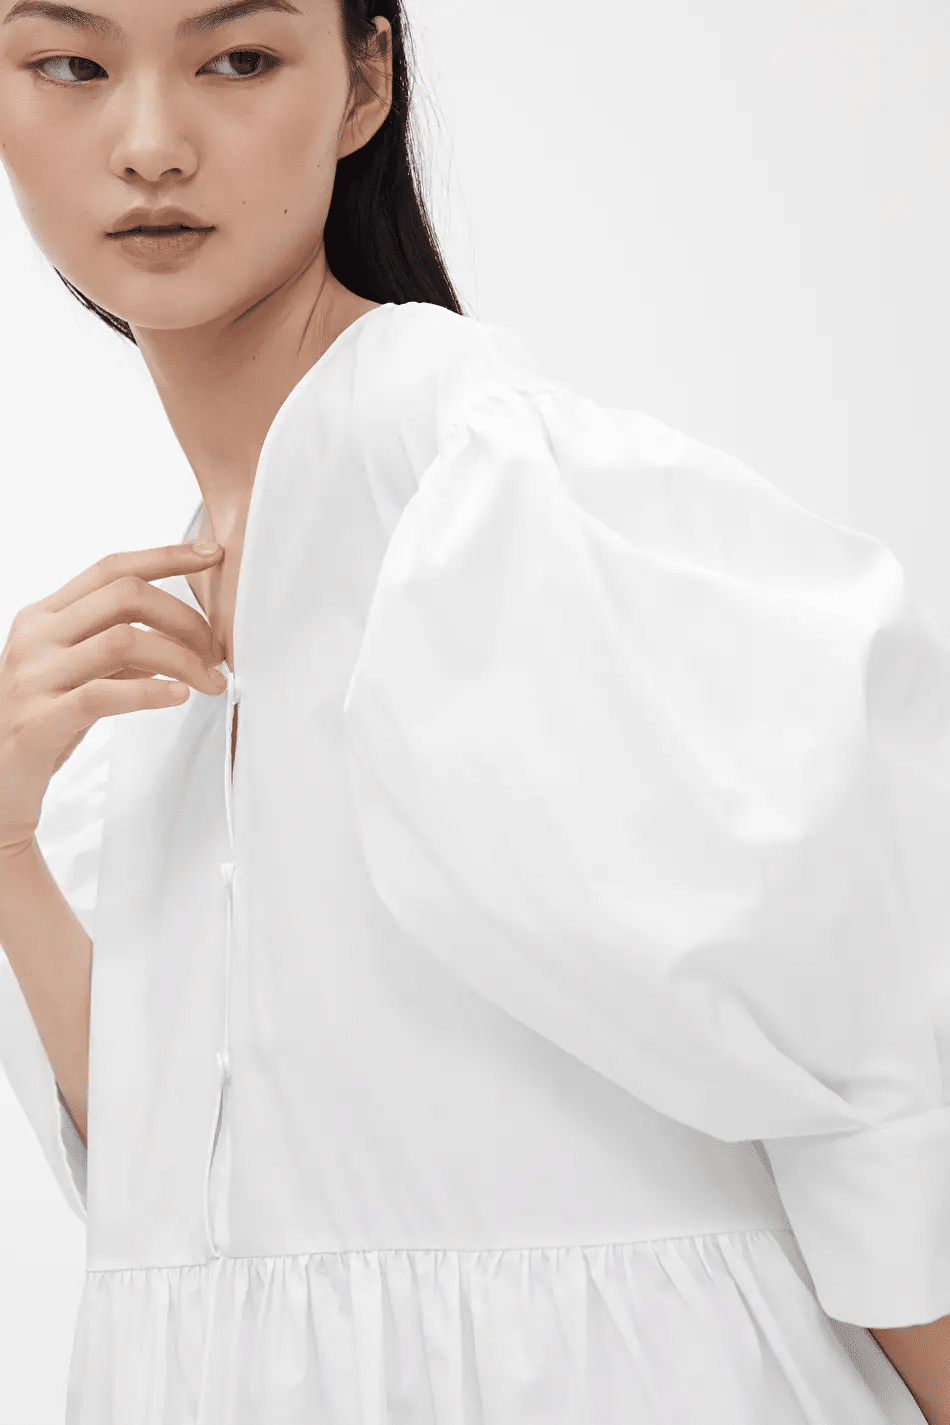 Model poses in white puff-sleeved blouse